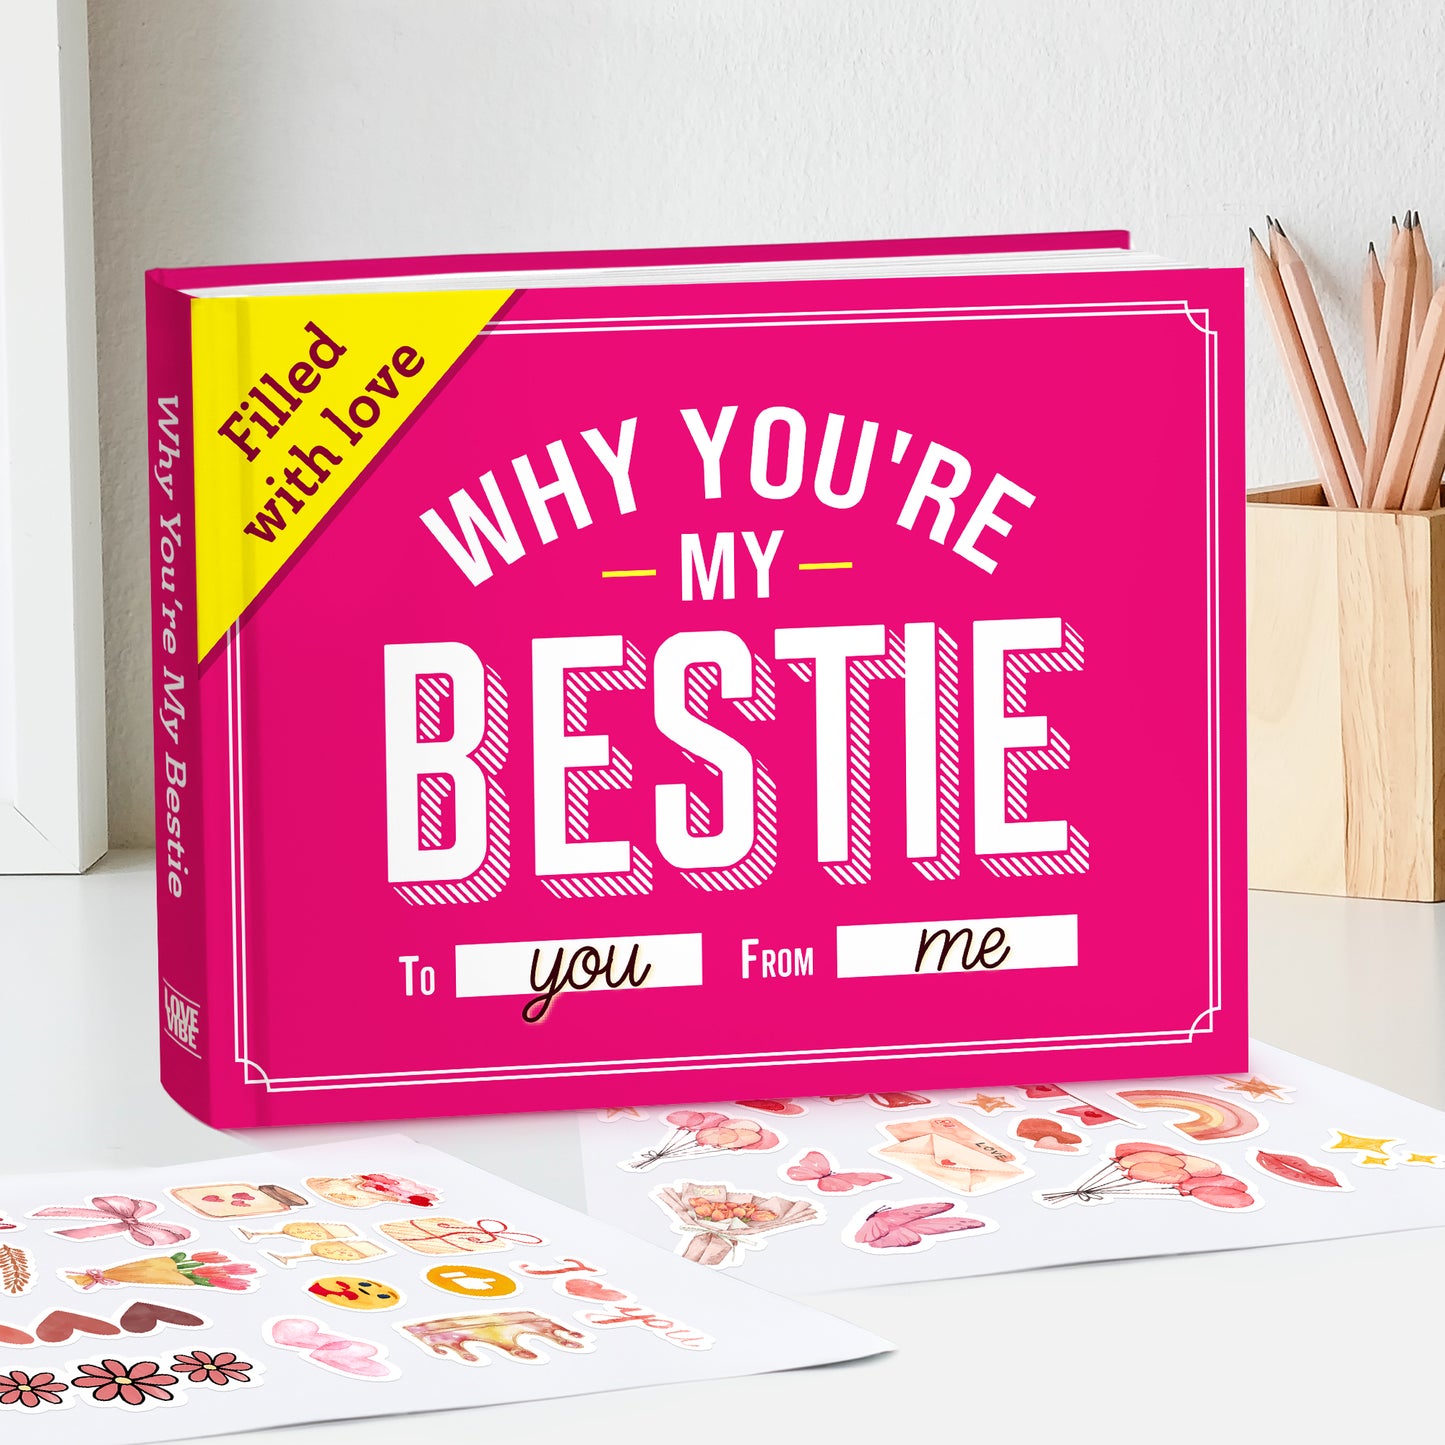 What I Love about Bestie Book - A fun, fill-in-the-blank book